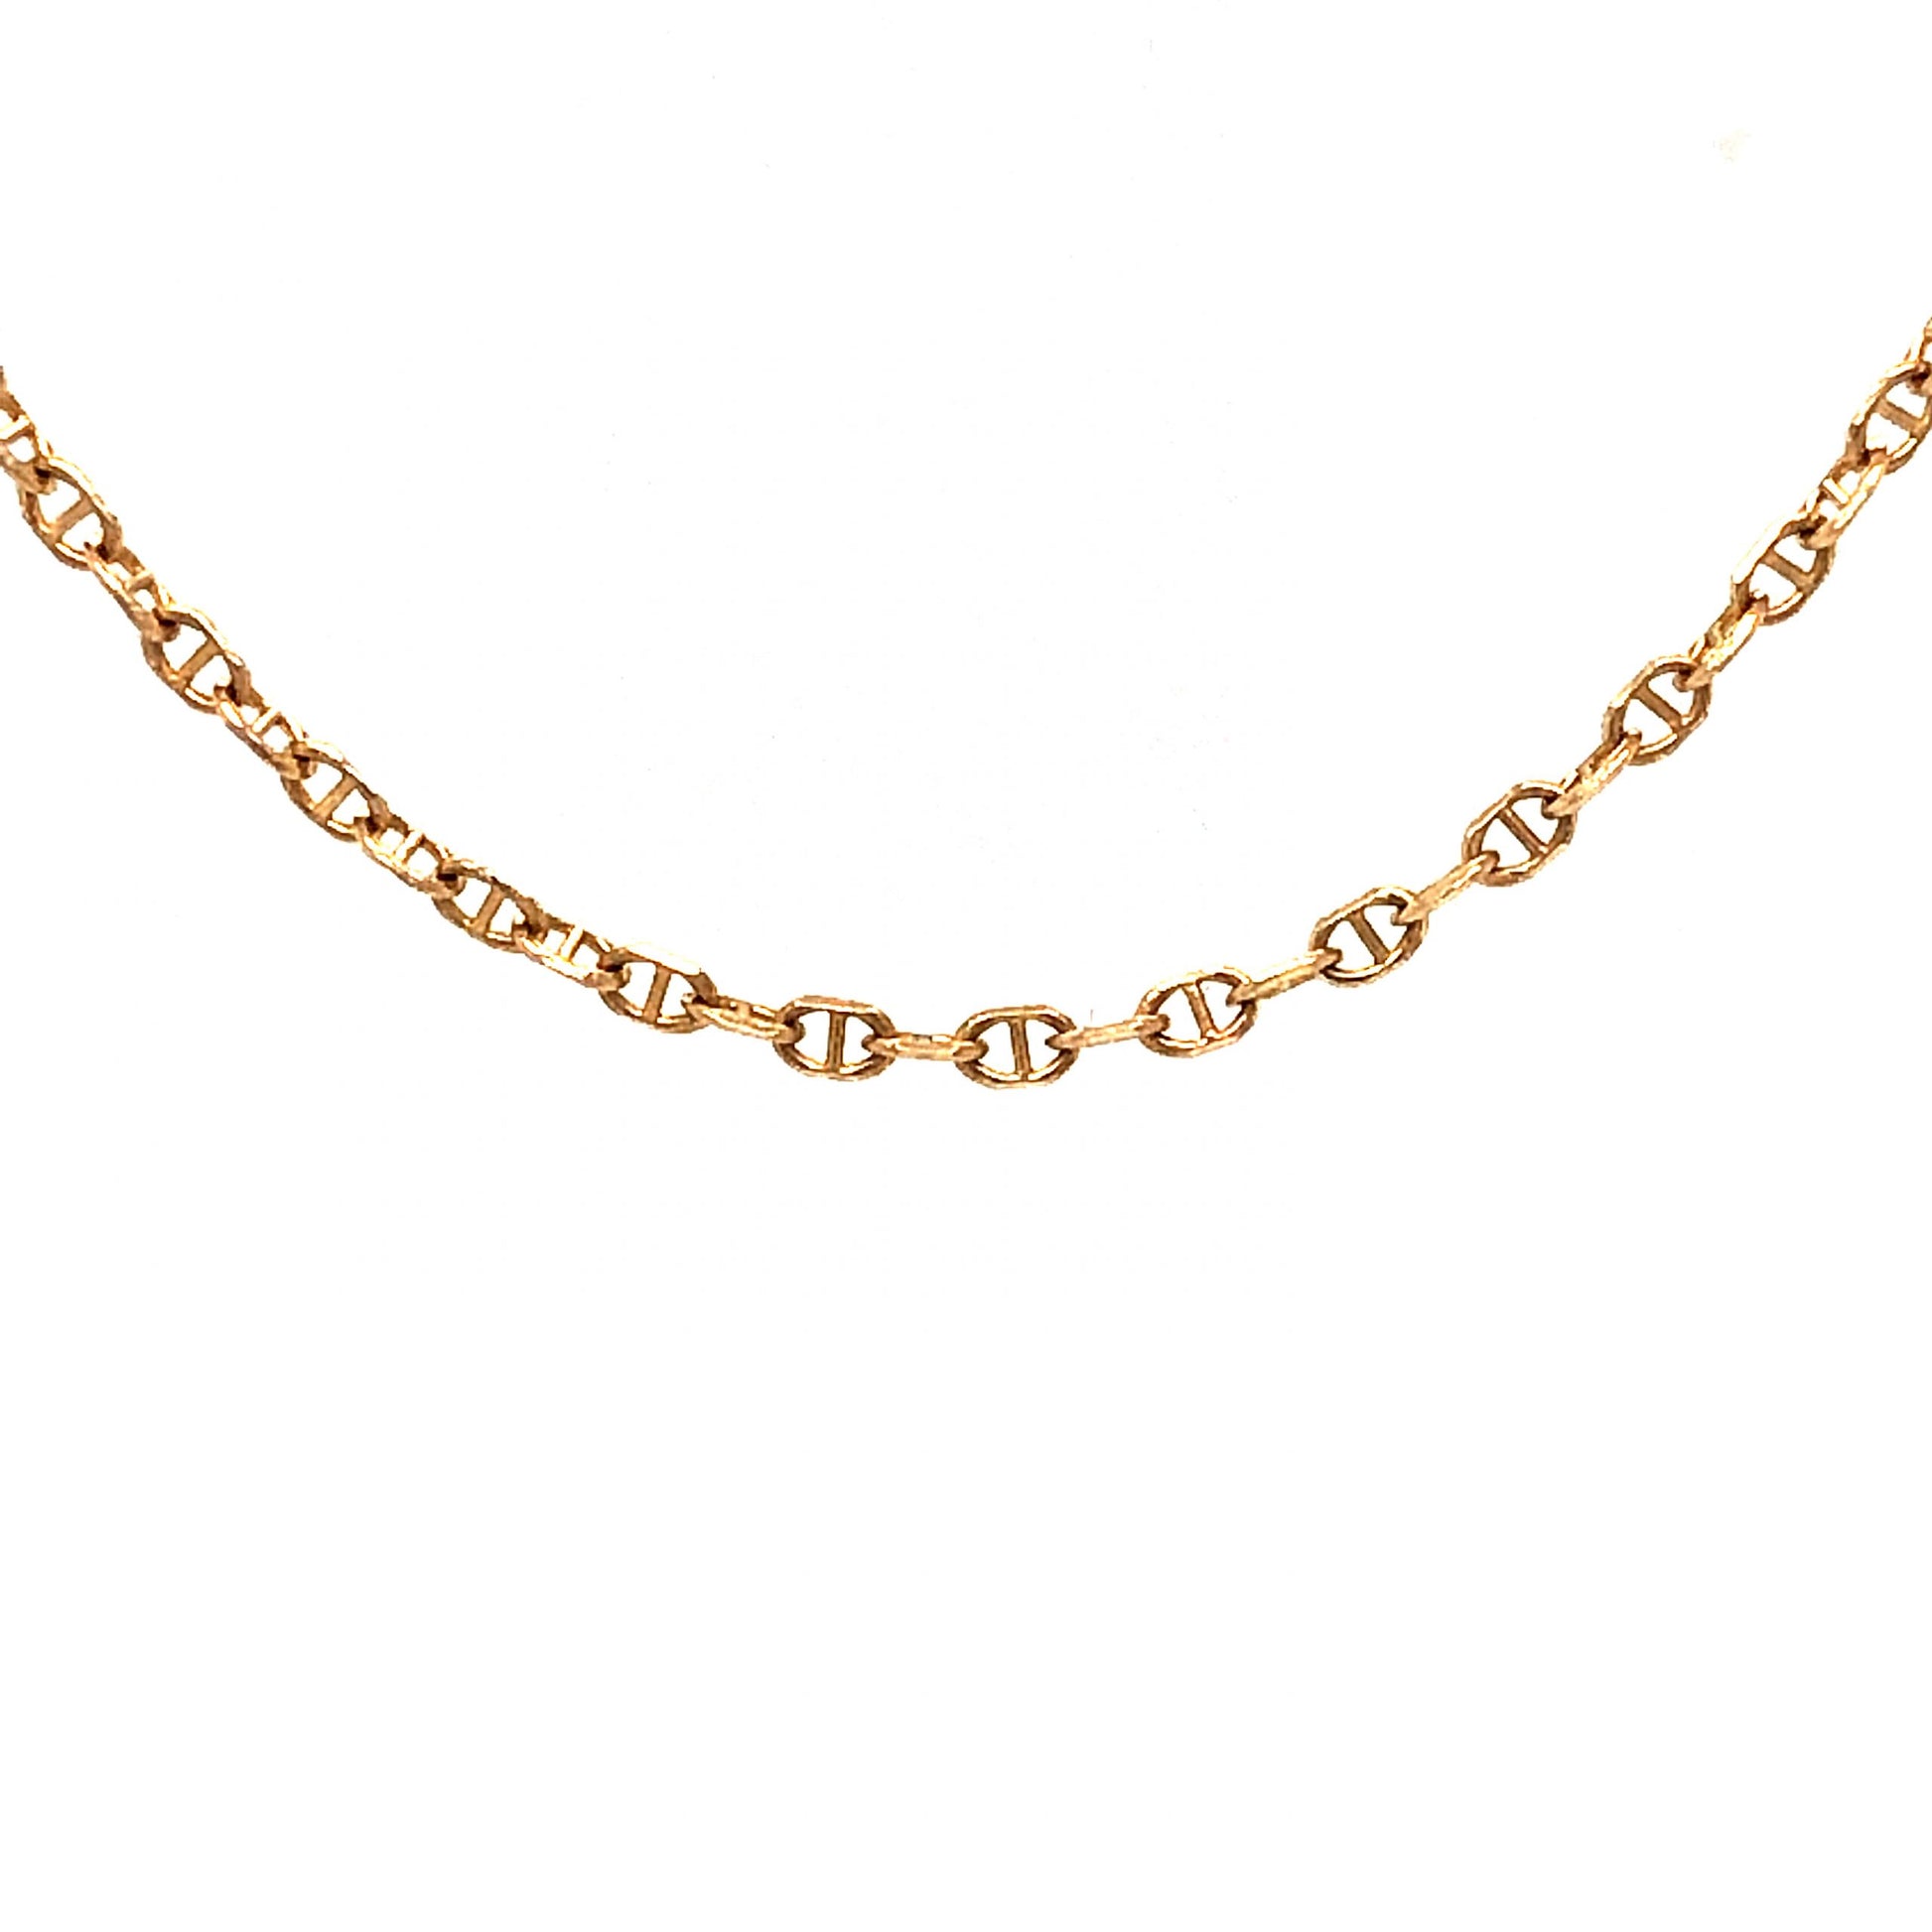 16 Inch Pendant Chain in 14k Yellow GoldComposition: 14 Karat Yellow GoldTotal Gram Weight: 1.6 gInscription: 14 KT ITALY